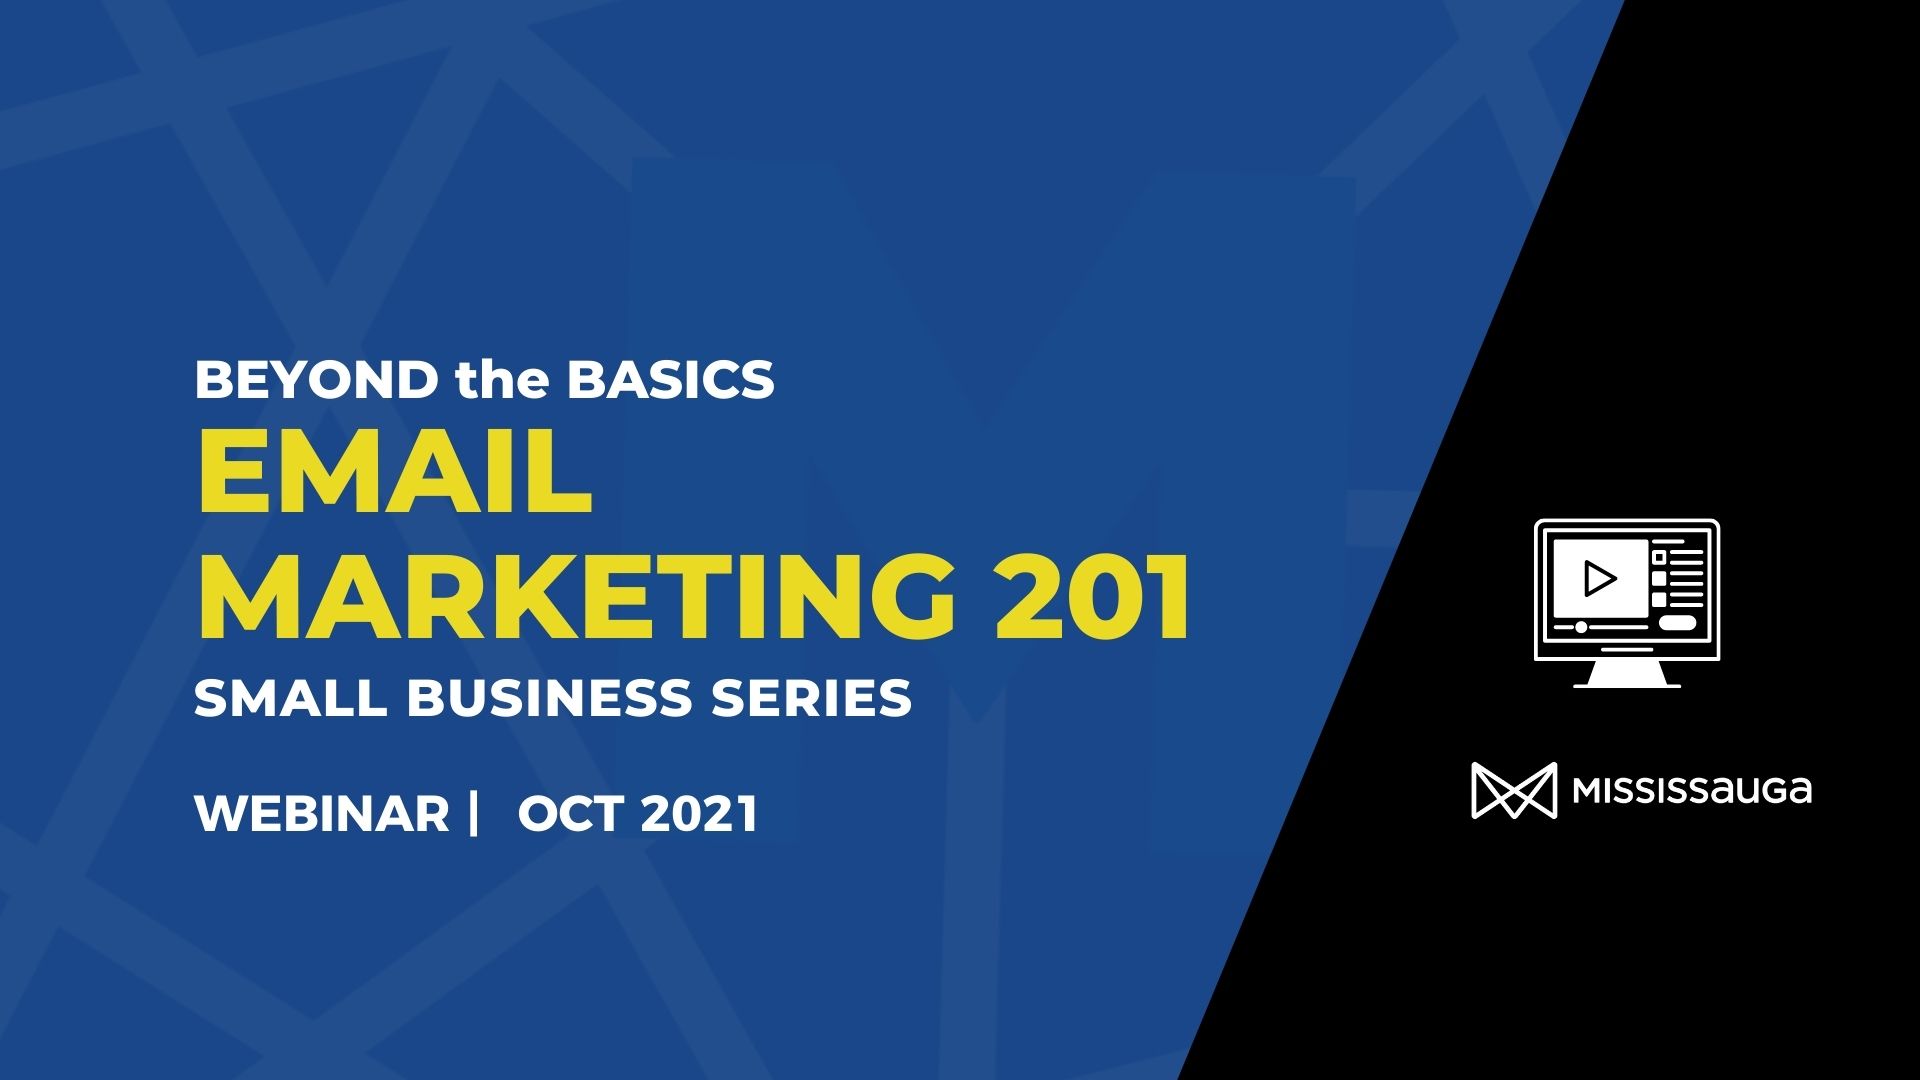 You are currently viewing Email Marketing 201 Beyond the Basics- Webinar Oct 7